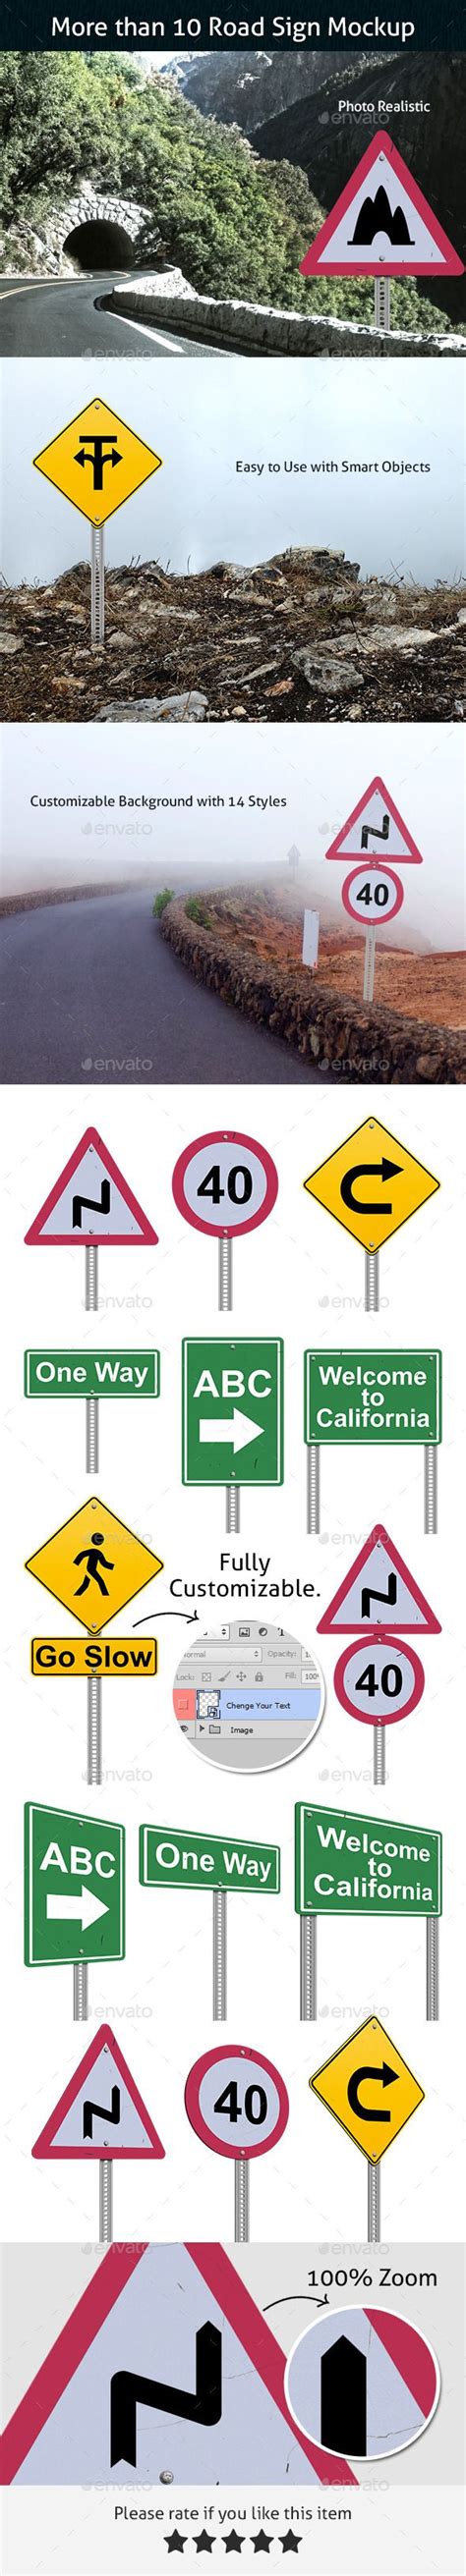 Pack Includes 14 High Quality Traffic Sign Mock Up With